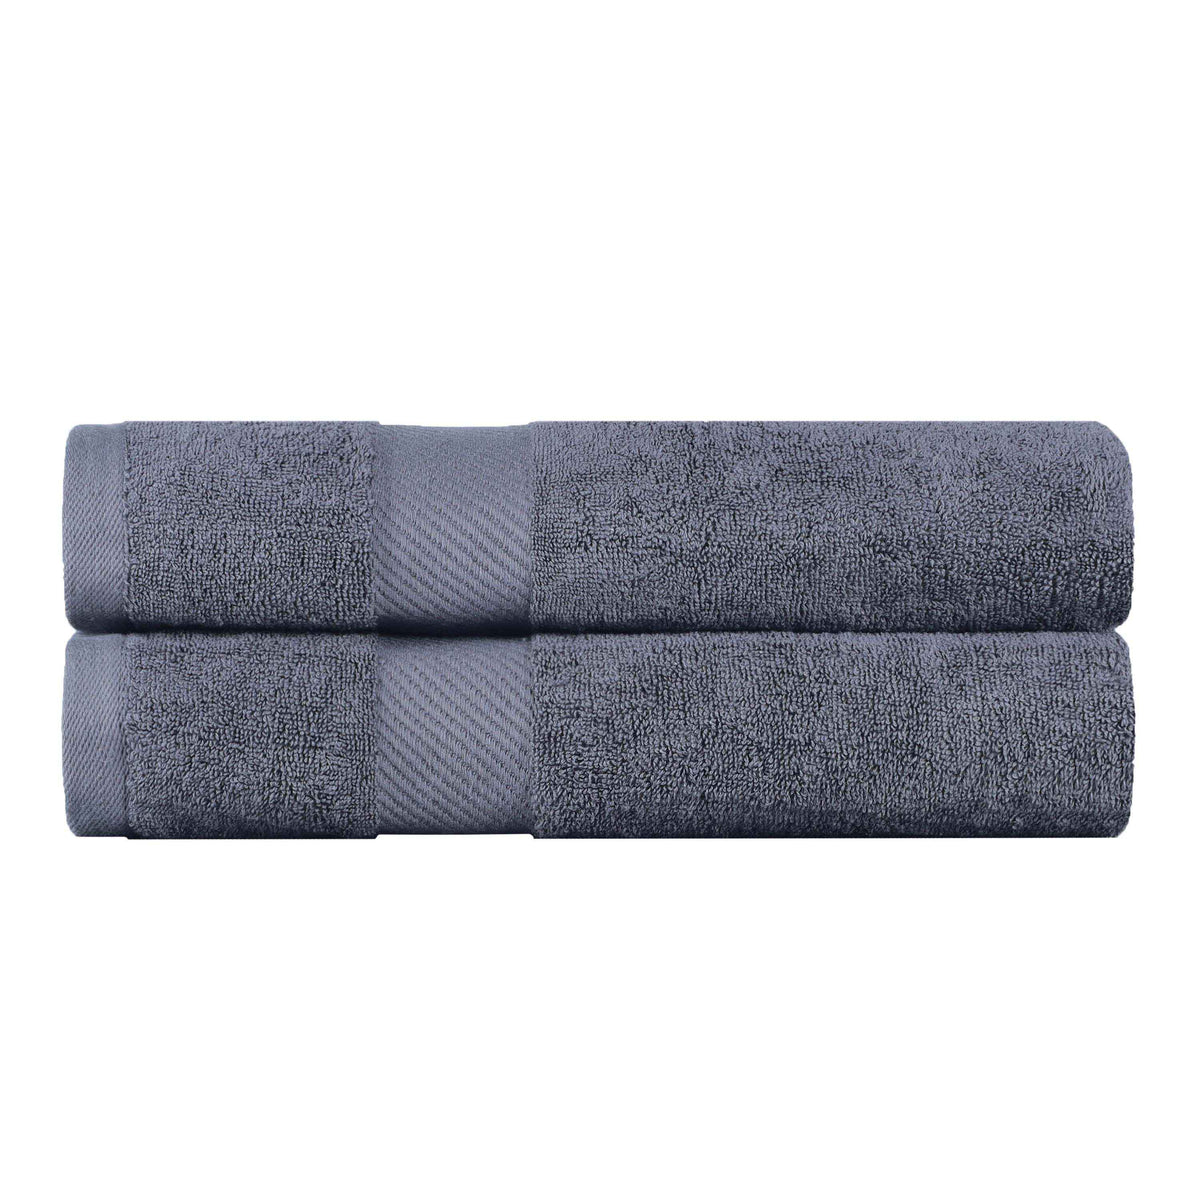 Kendell Egyptian Cotton Solid Medium Weight Bath Towel Set of 2